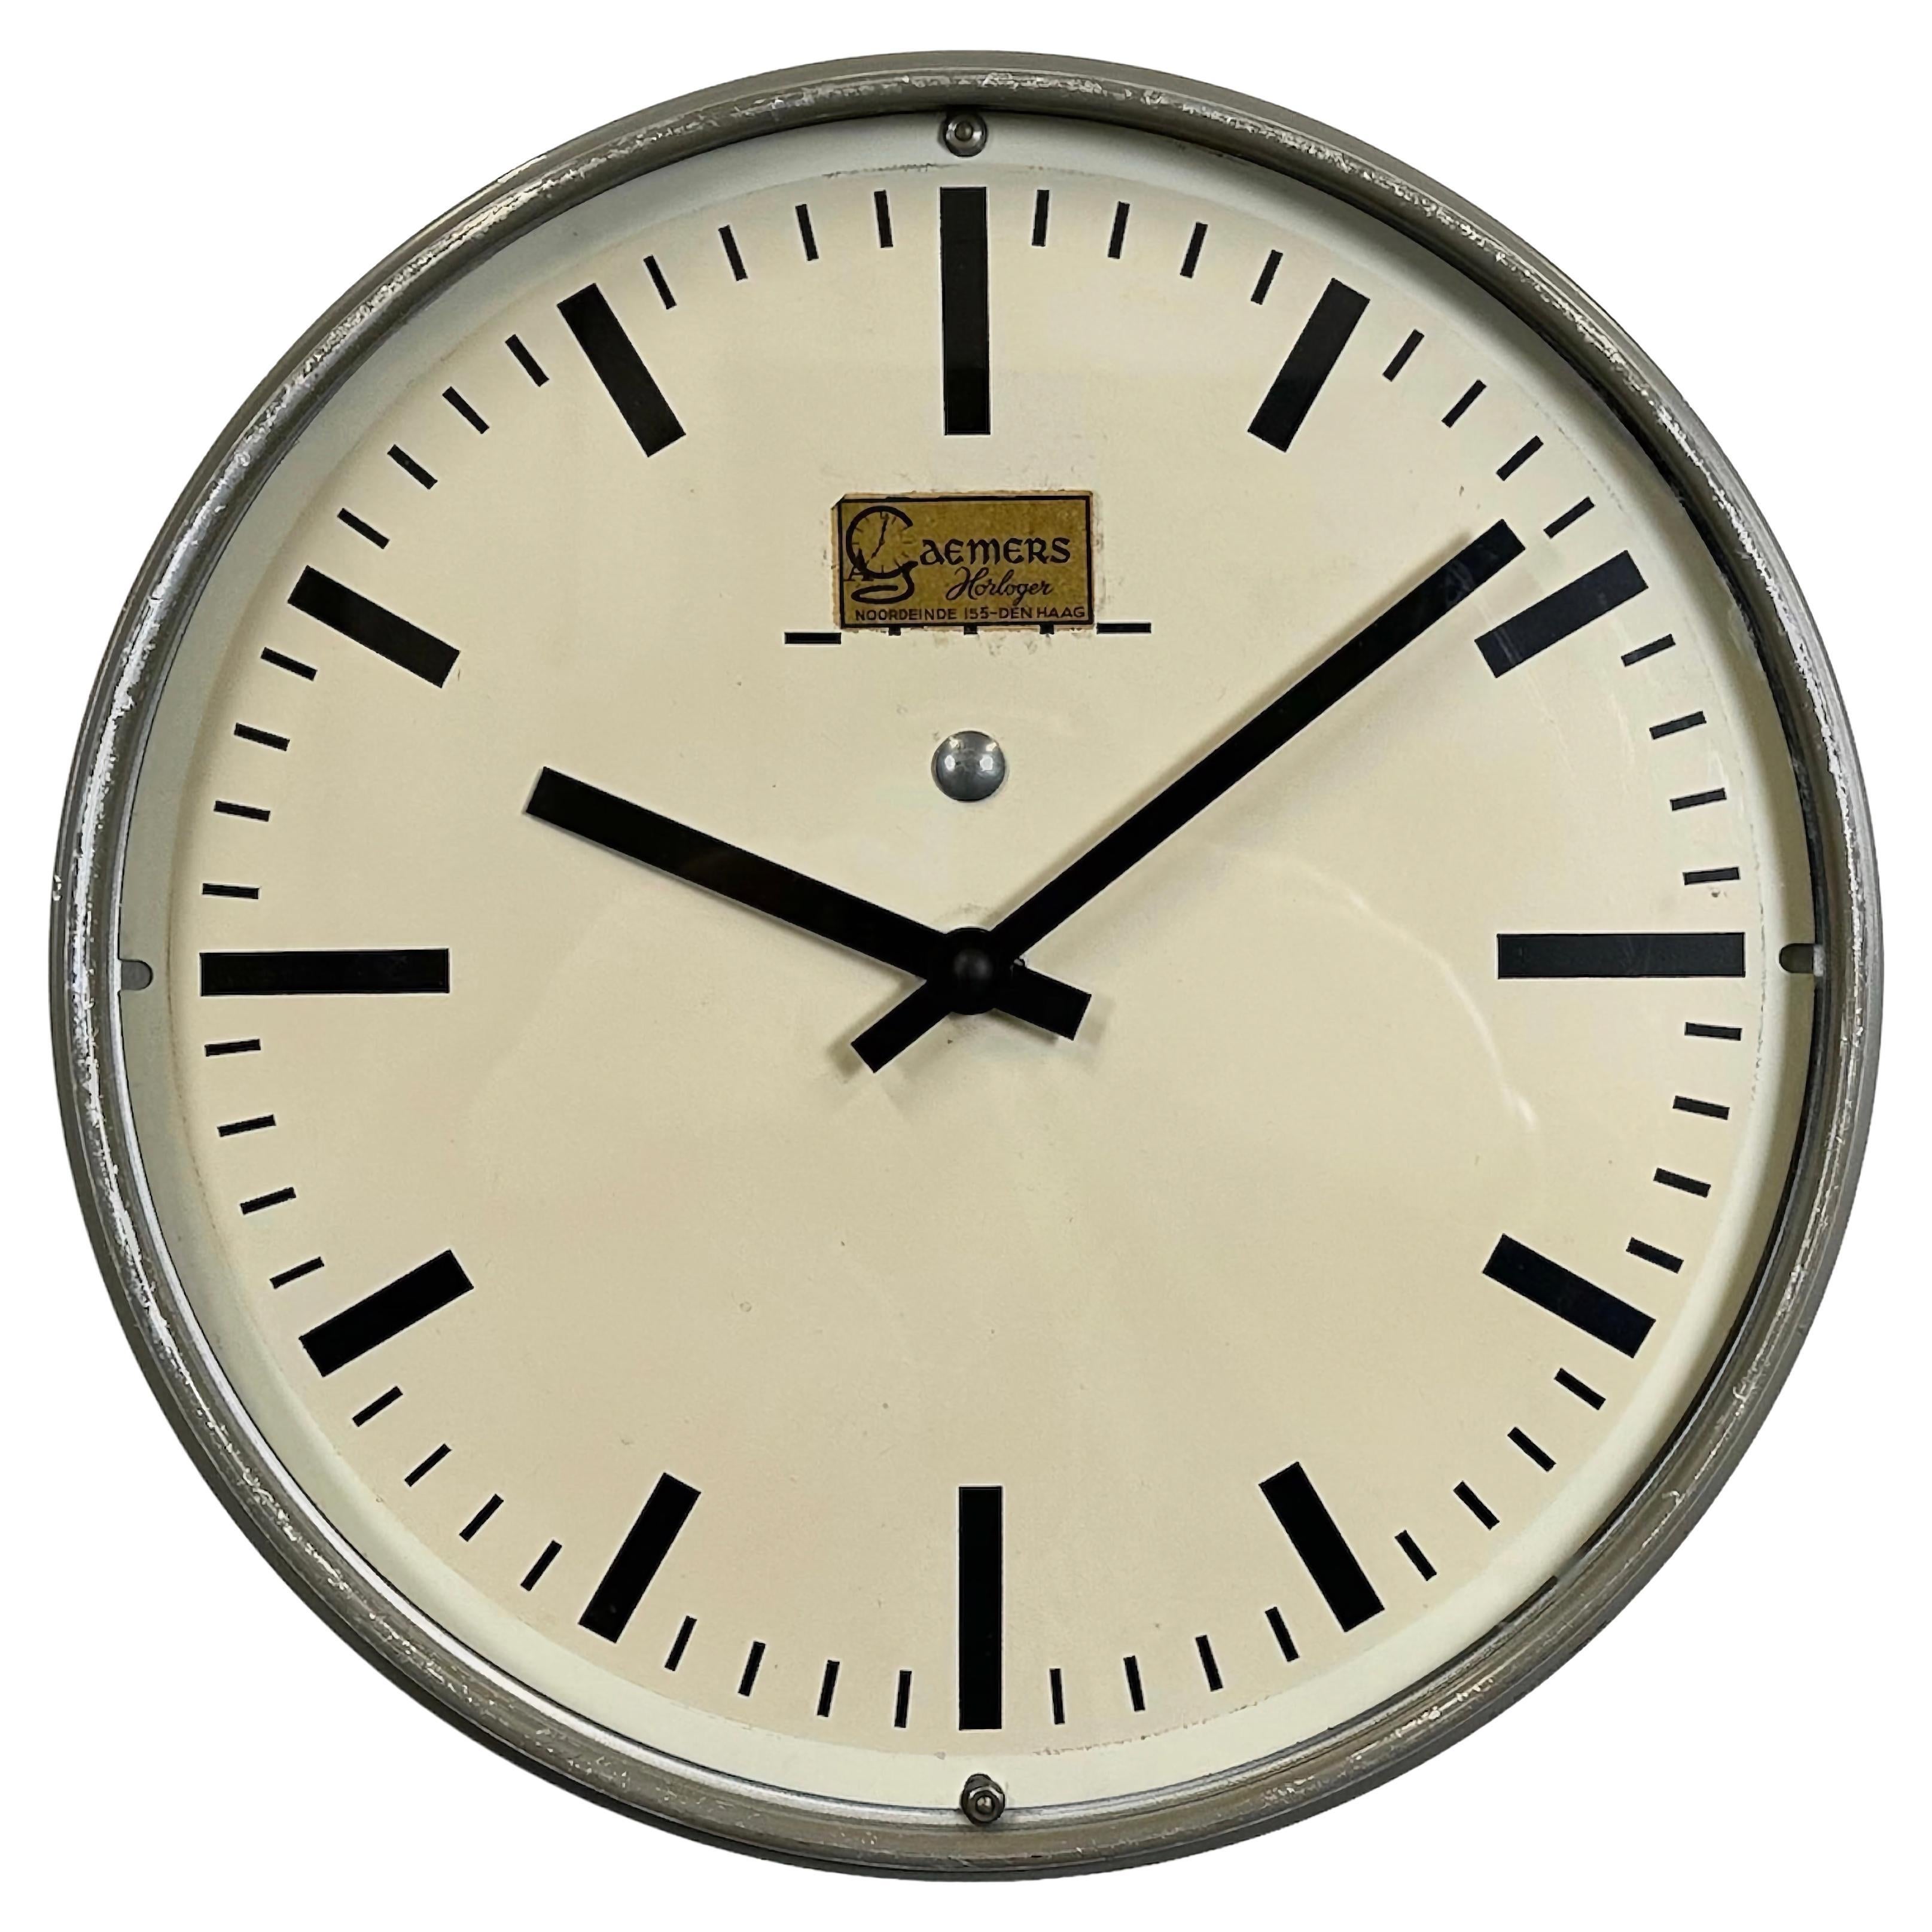 Vintage Dutch Wall Clock from Gaemers Horloger,  1950s For Sale